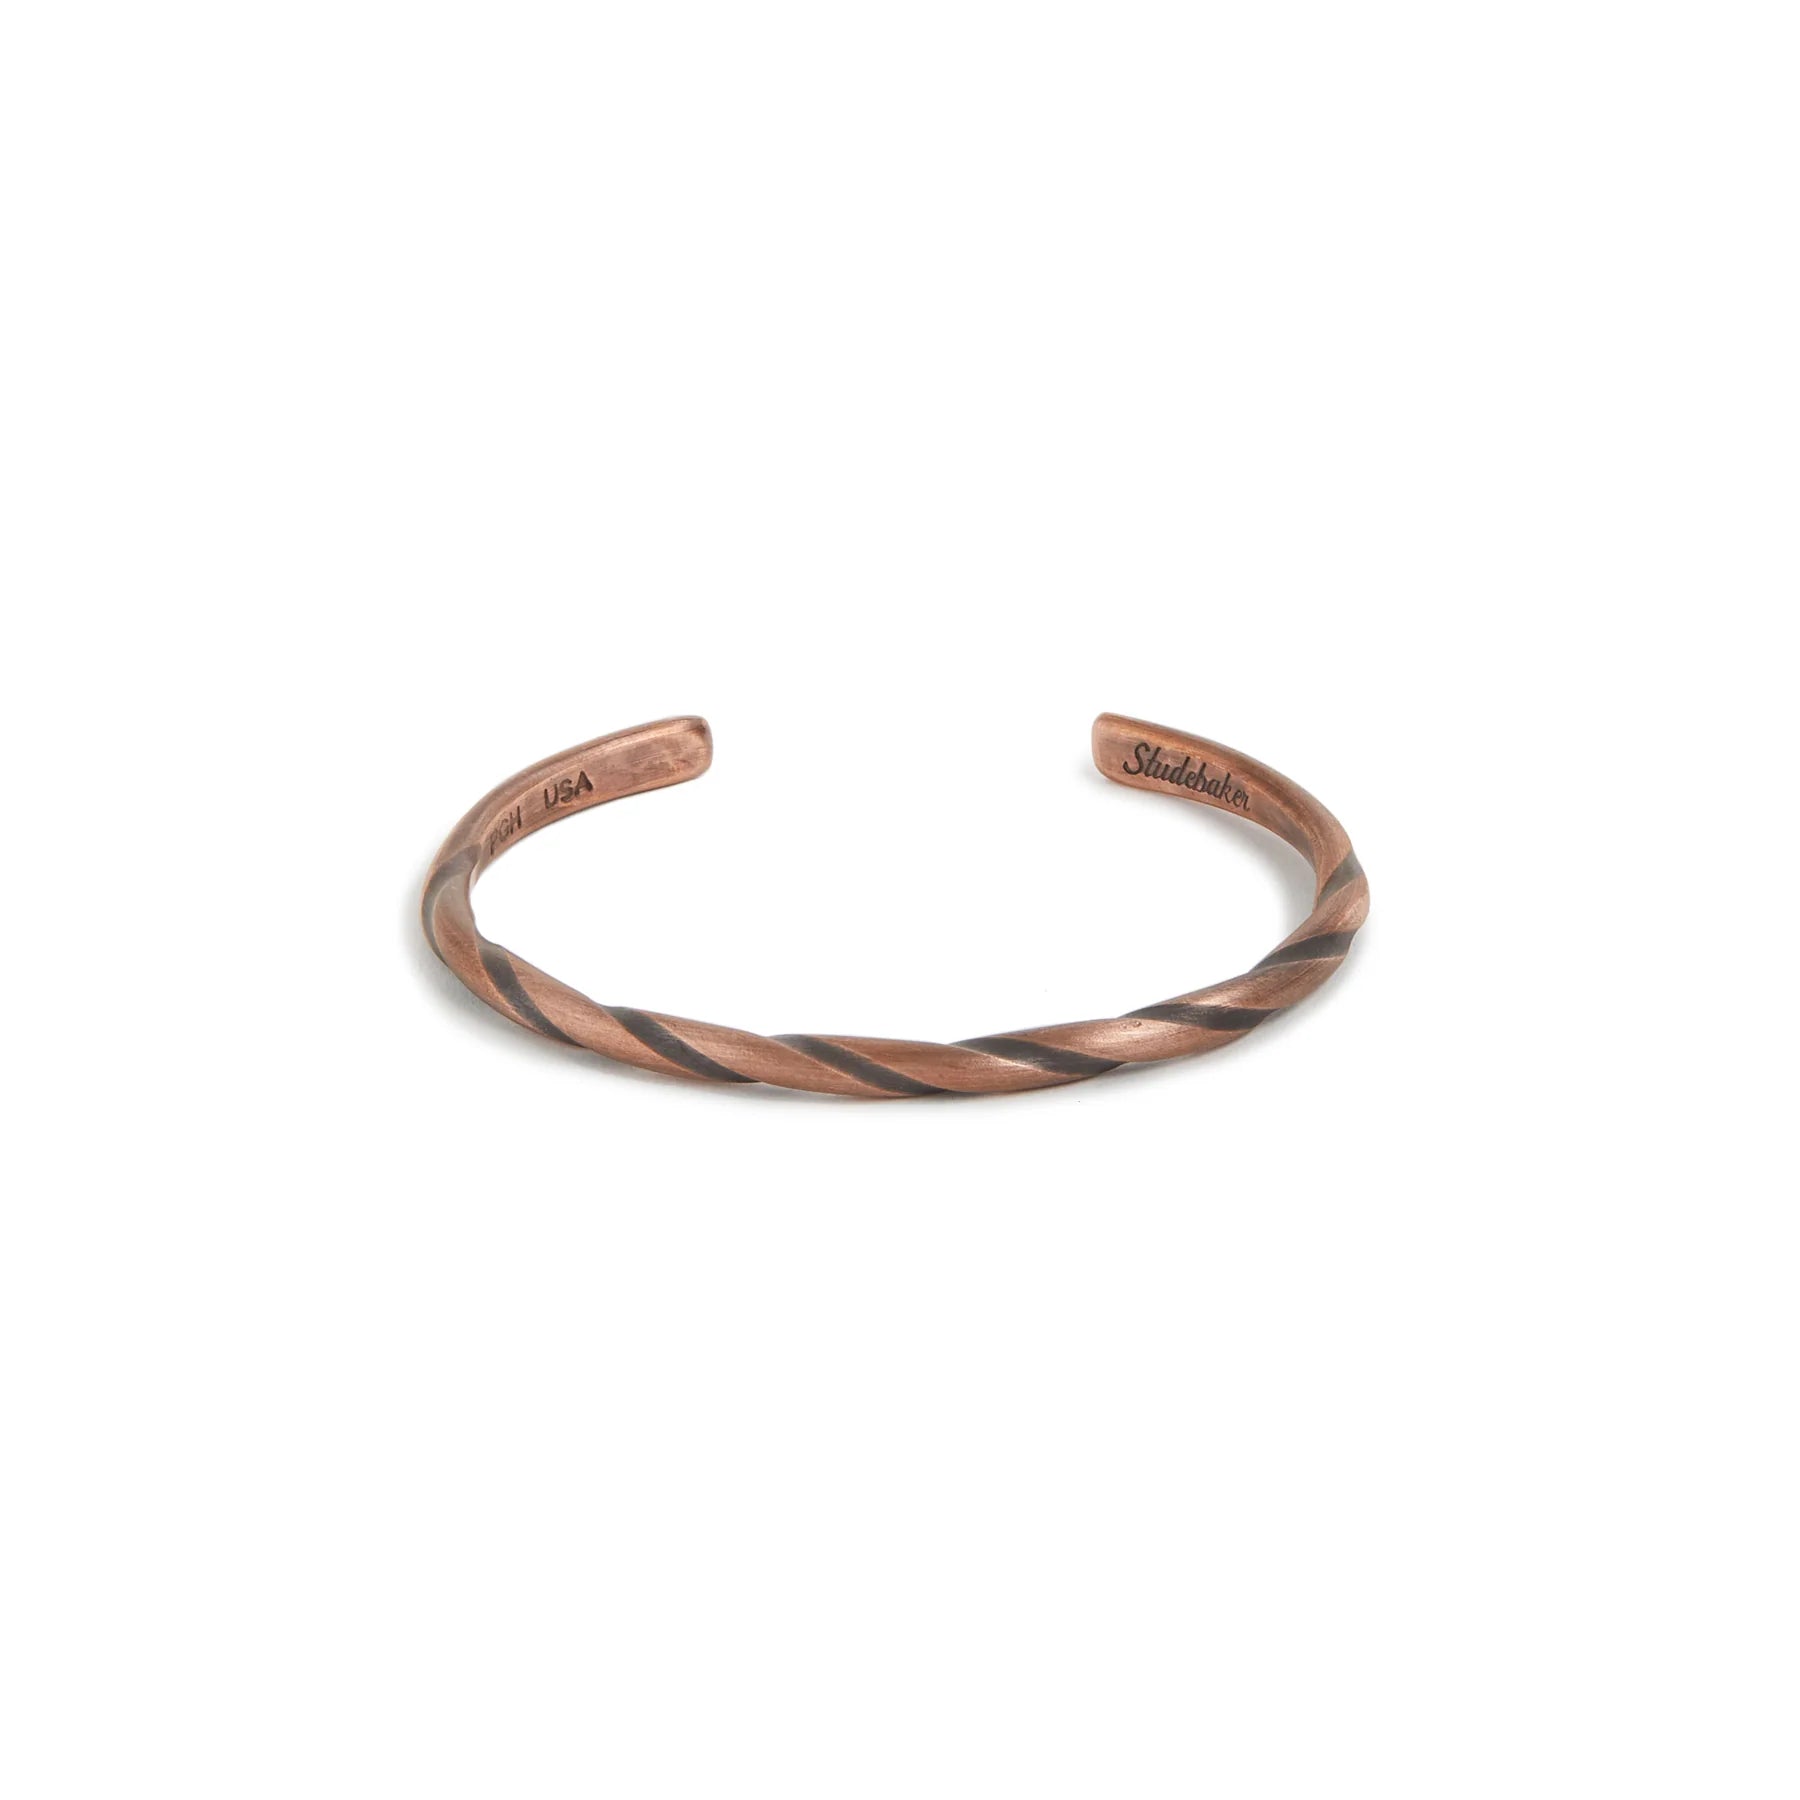 Studebaker - Rotary Cuff - Large-Men's Accessories-Copper-Yaletown-Vancouver-Surrey-Canada